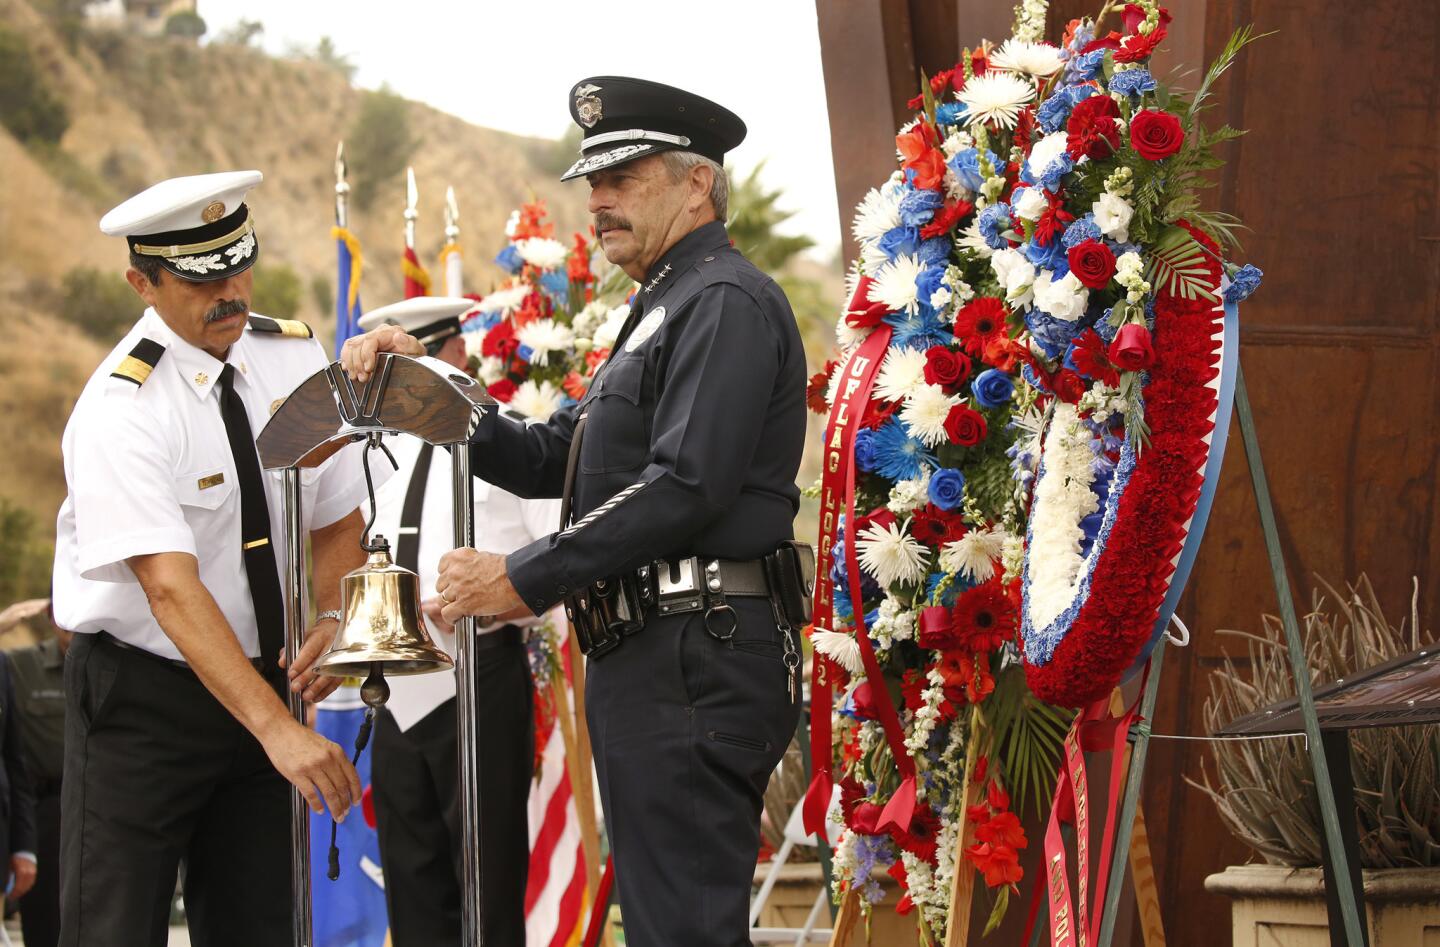 Los Angeles Fire Chief Ralph Terrazas, left, and LAPD Chief Charlie Beck, right, perform the ringing of the bell ceremony for fallen firefighters during the 9/11 Remembrance Ceremony.